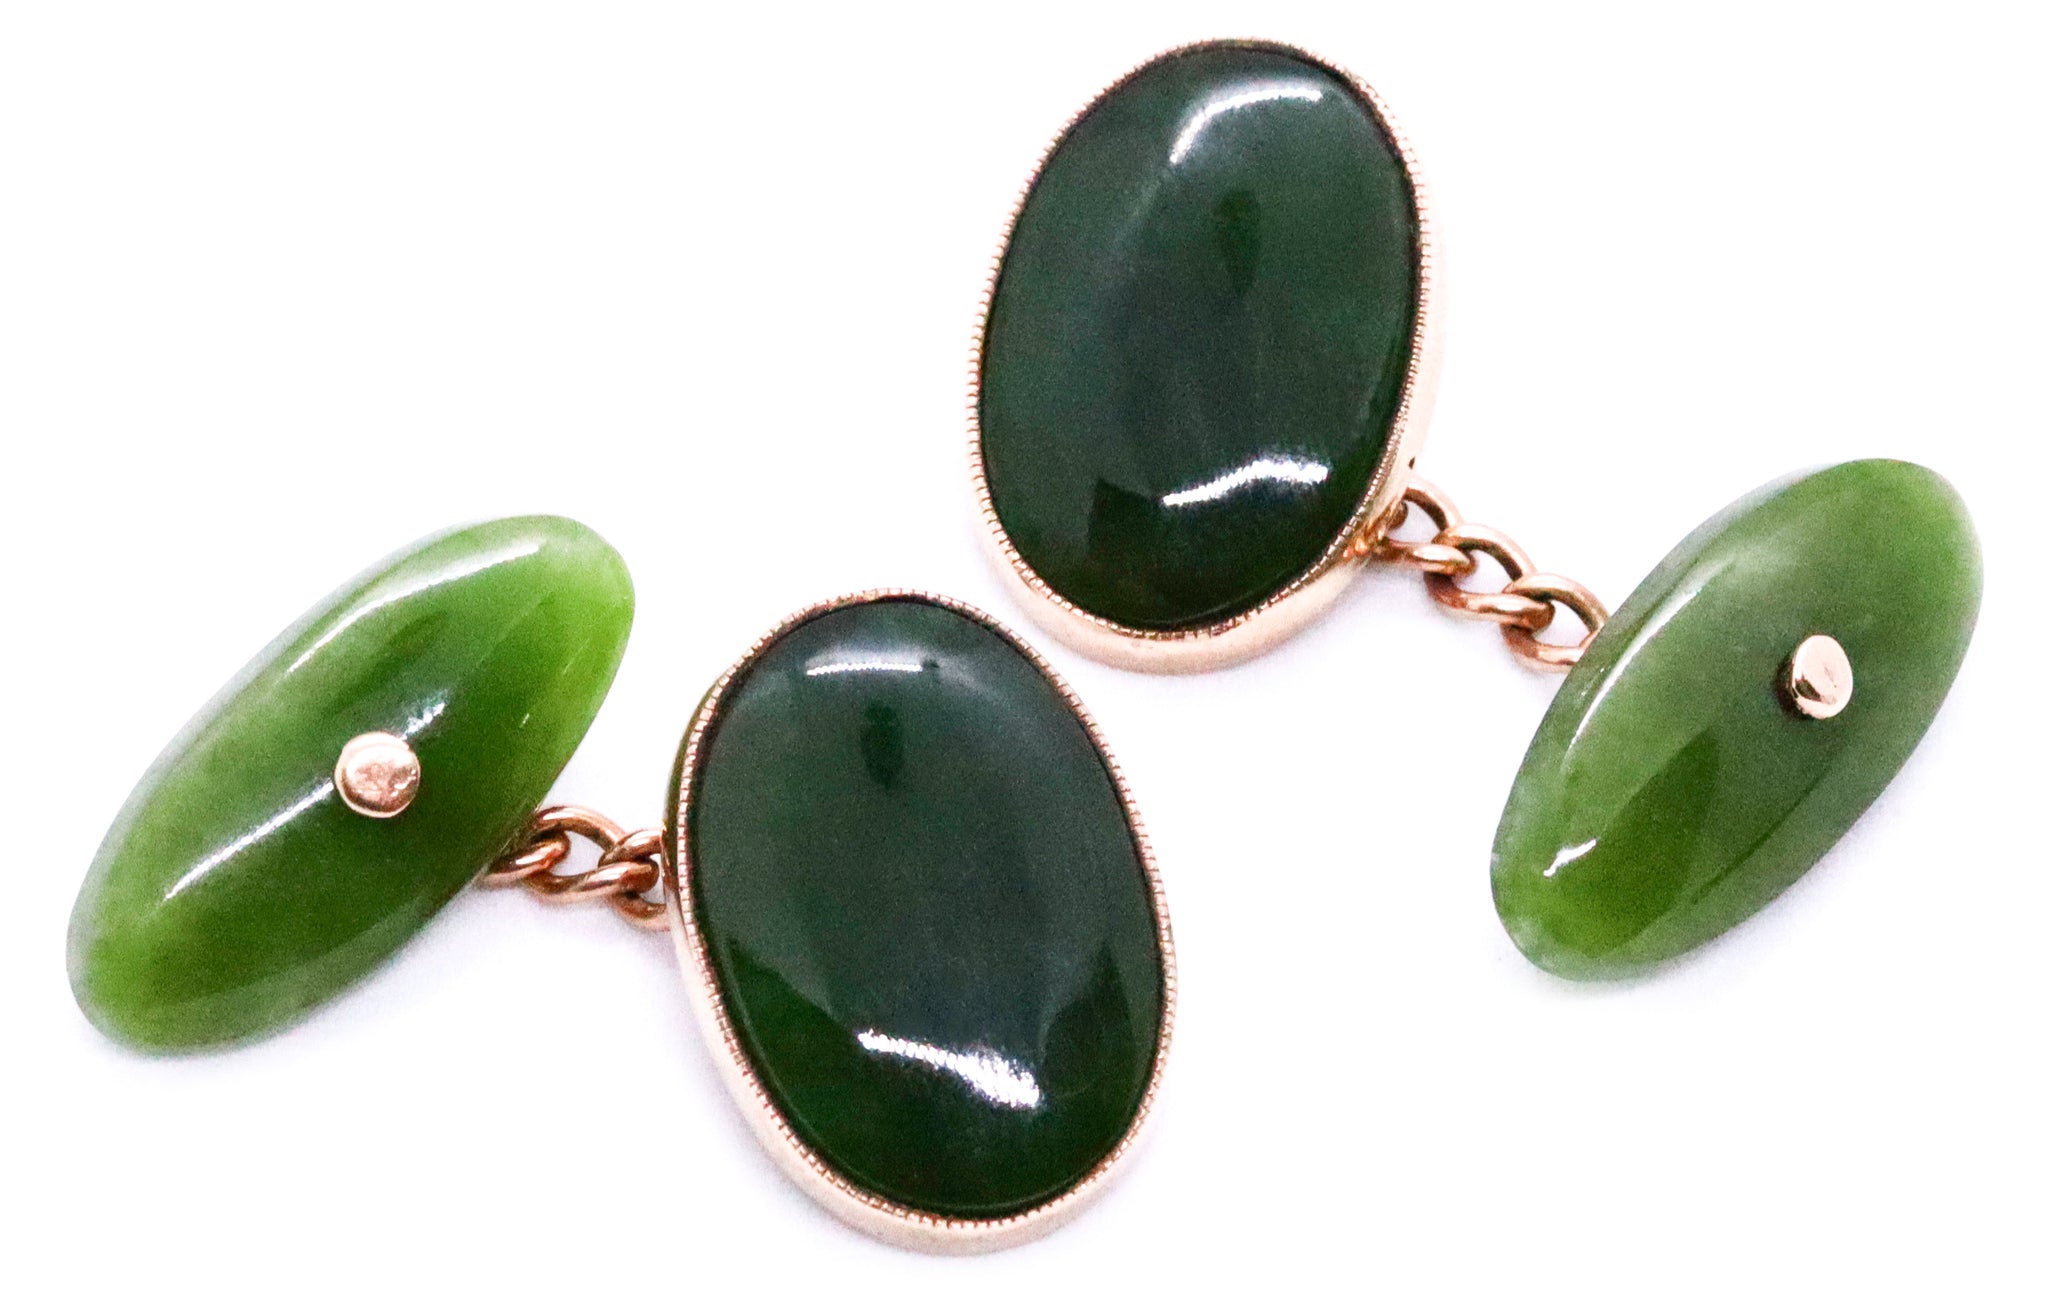 British Art Deco 1930 Antique Pair Of Cufflinks In 9Kt Rose Gold With Natural Translucent Green Jade